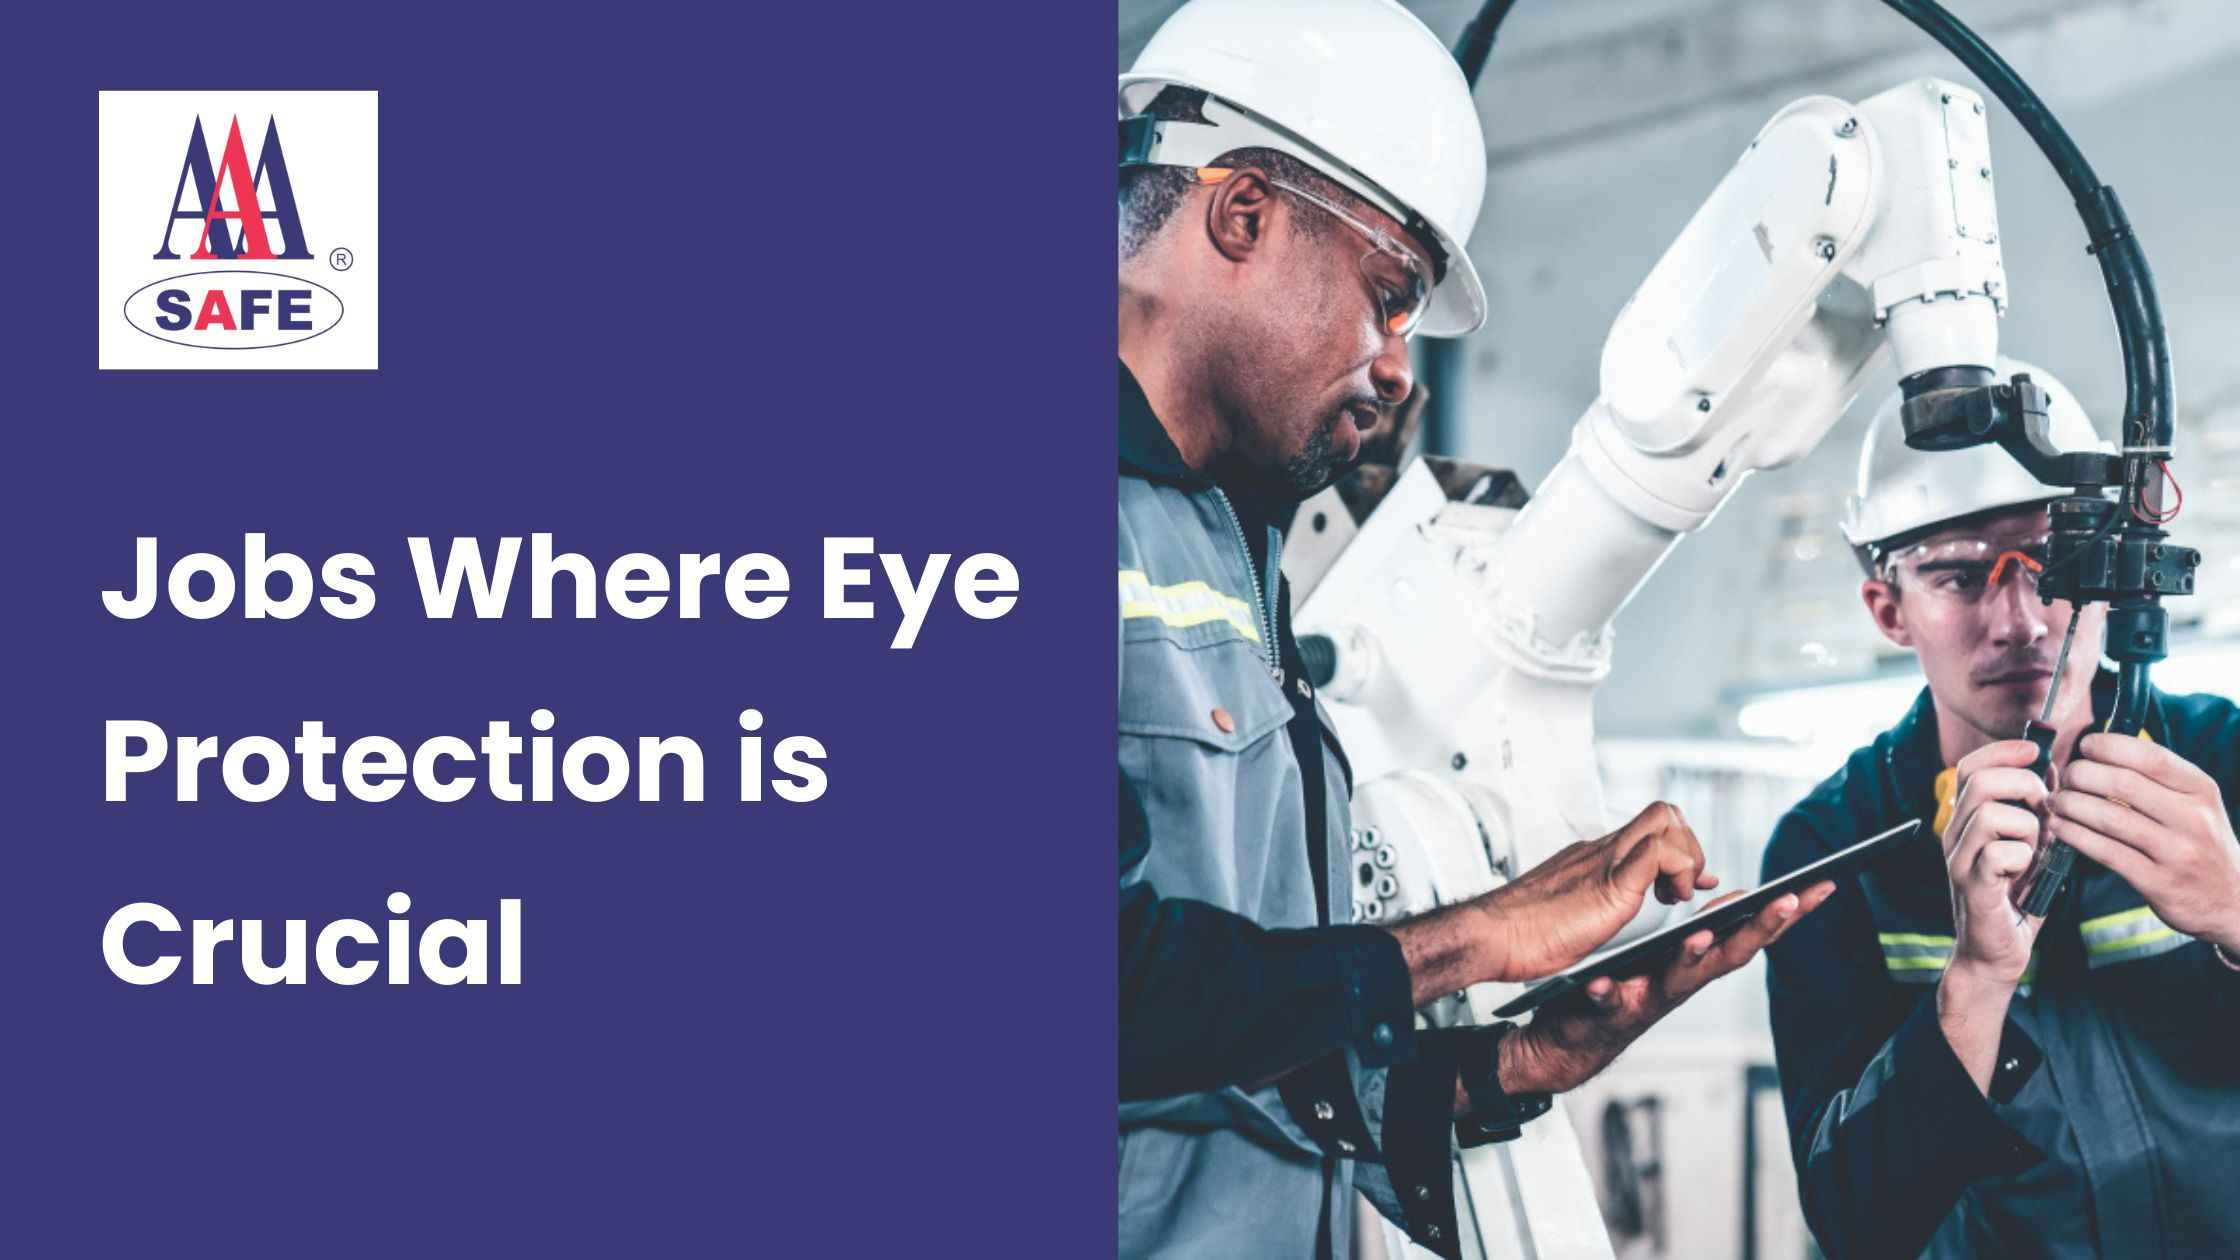 Jobs Where Eye Protection is Crucial